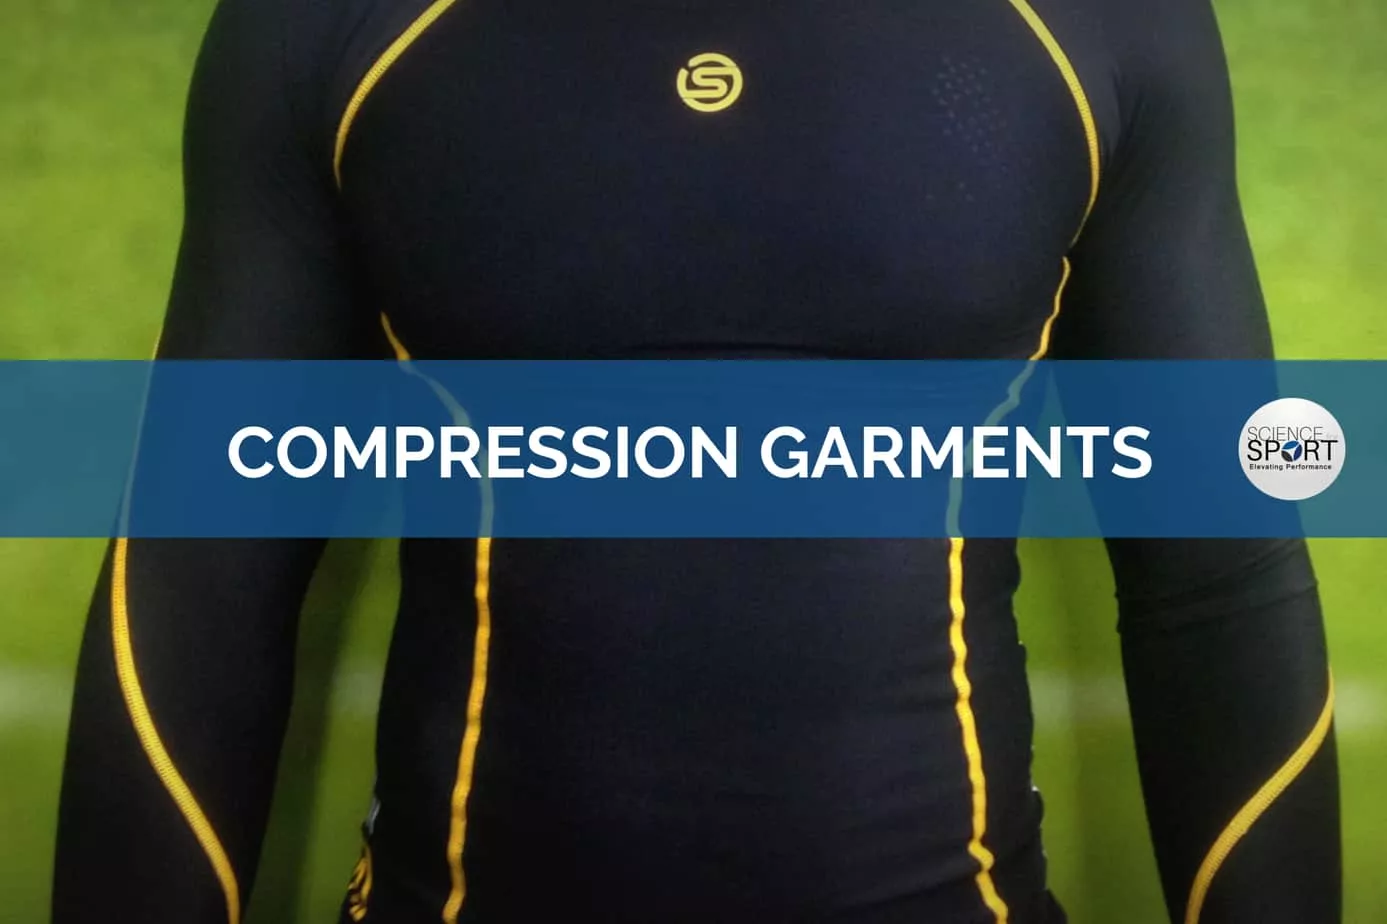 Effects of a Whole Body Compression Garment on Markers of Recovery